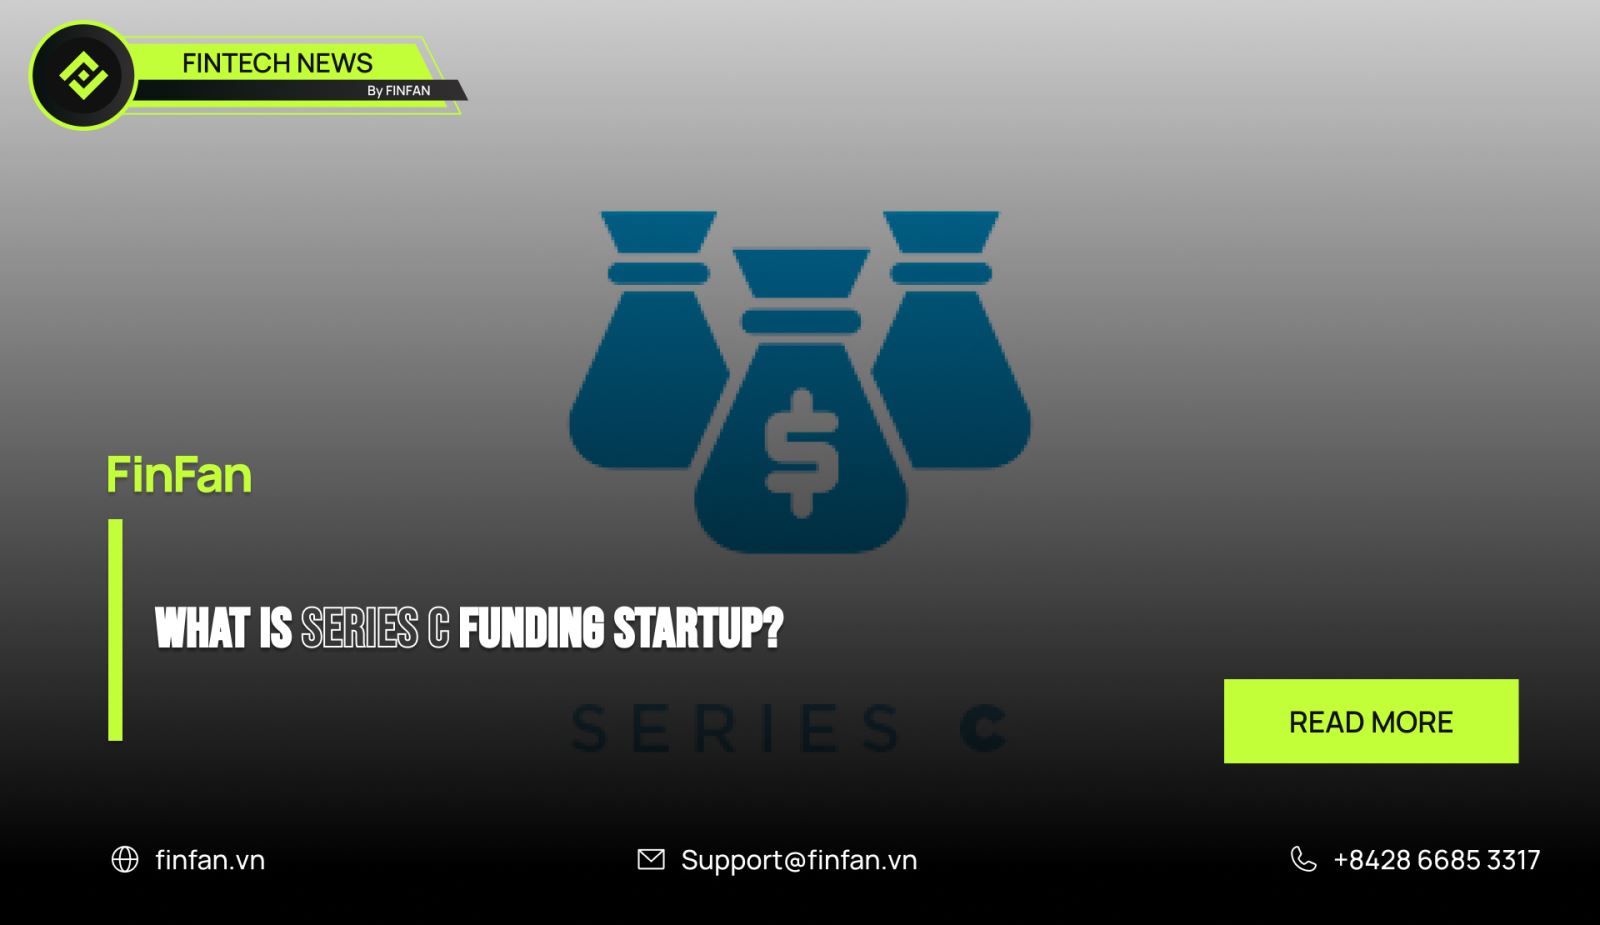 What is Series C funding startup?